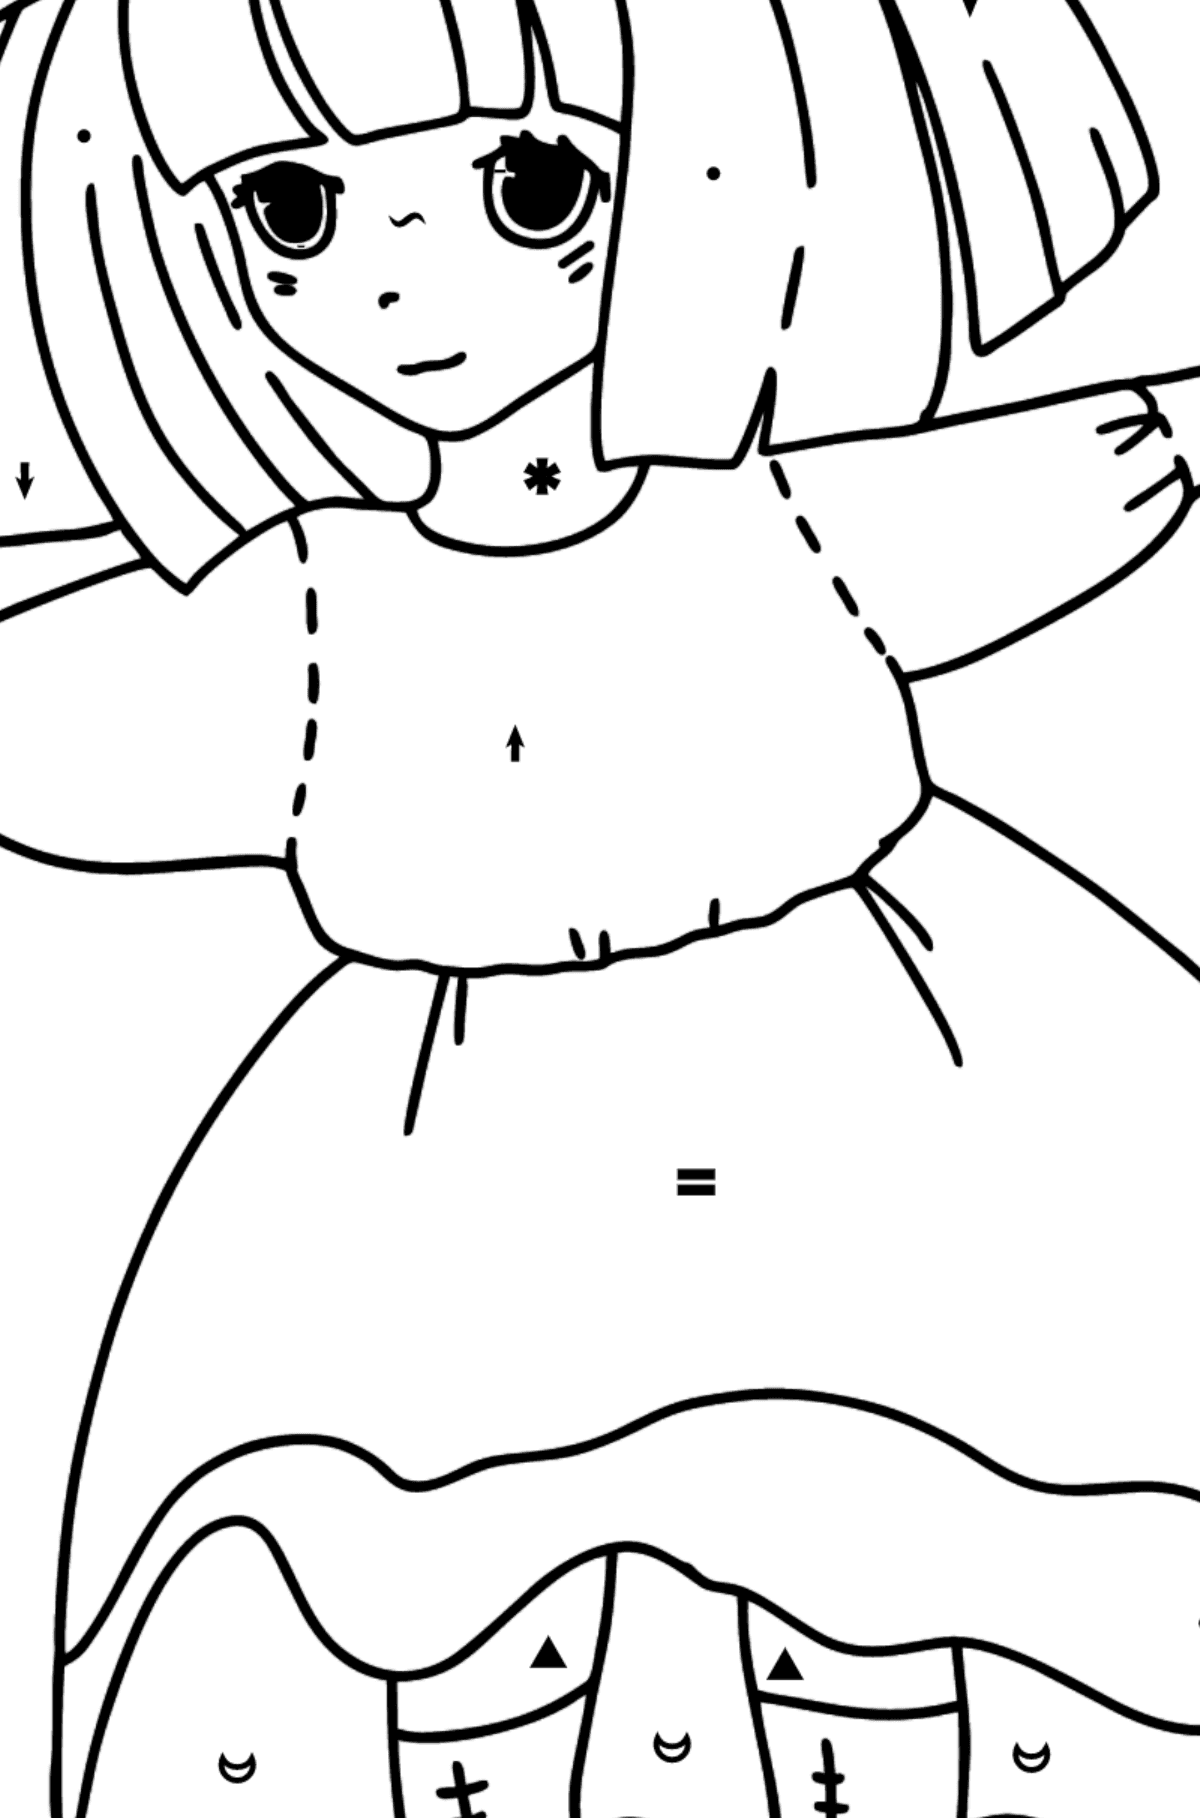 Anime Girl Dancing coloring page - Coloring by Symbols for Kids